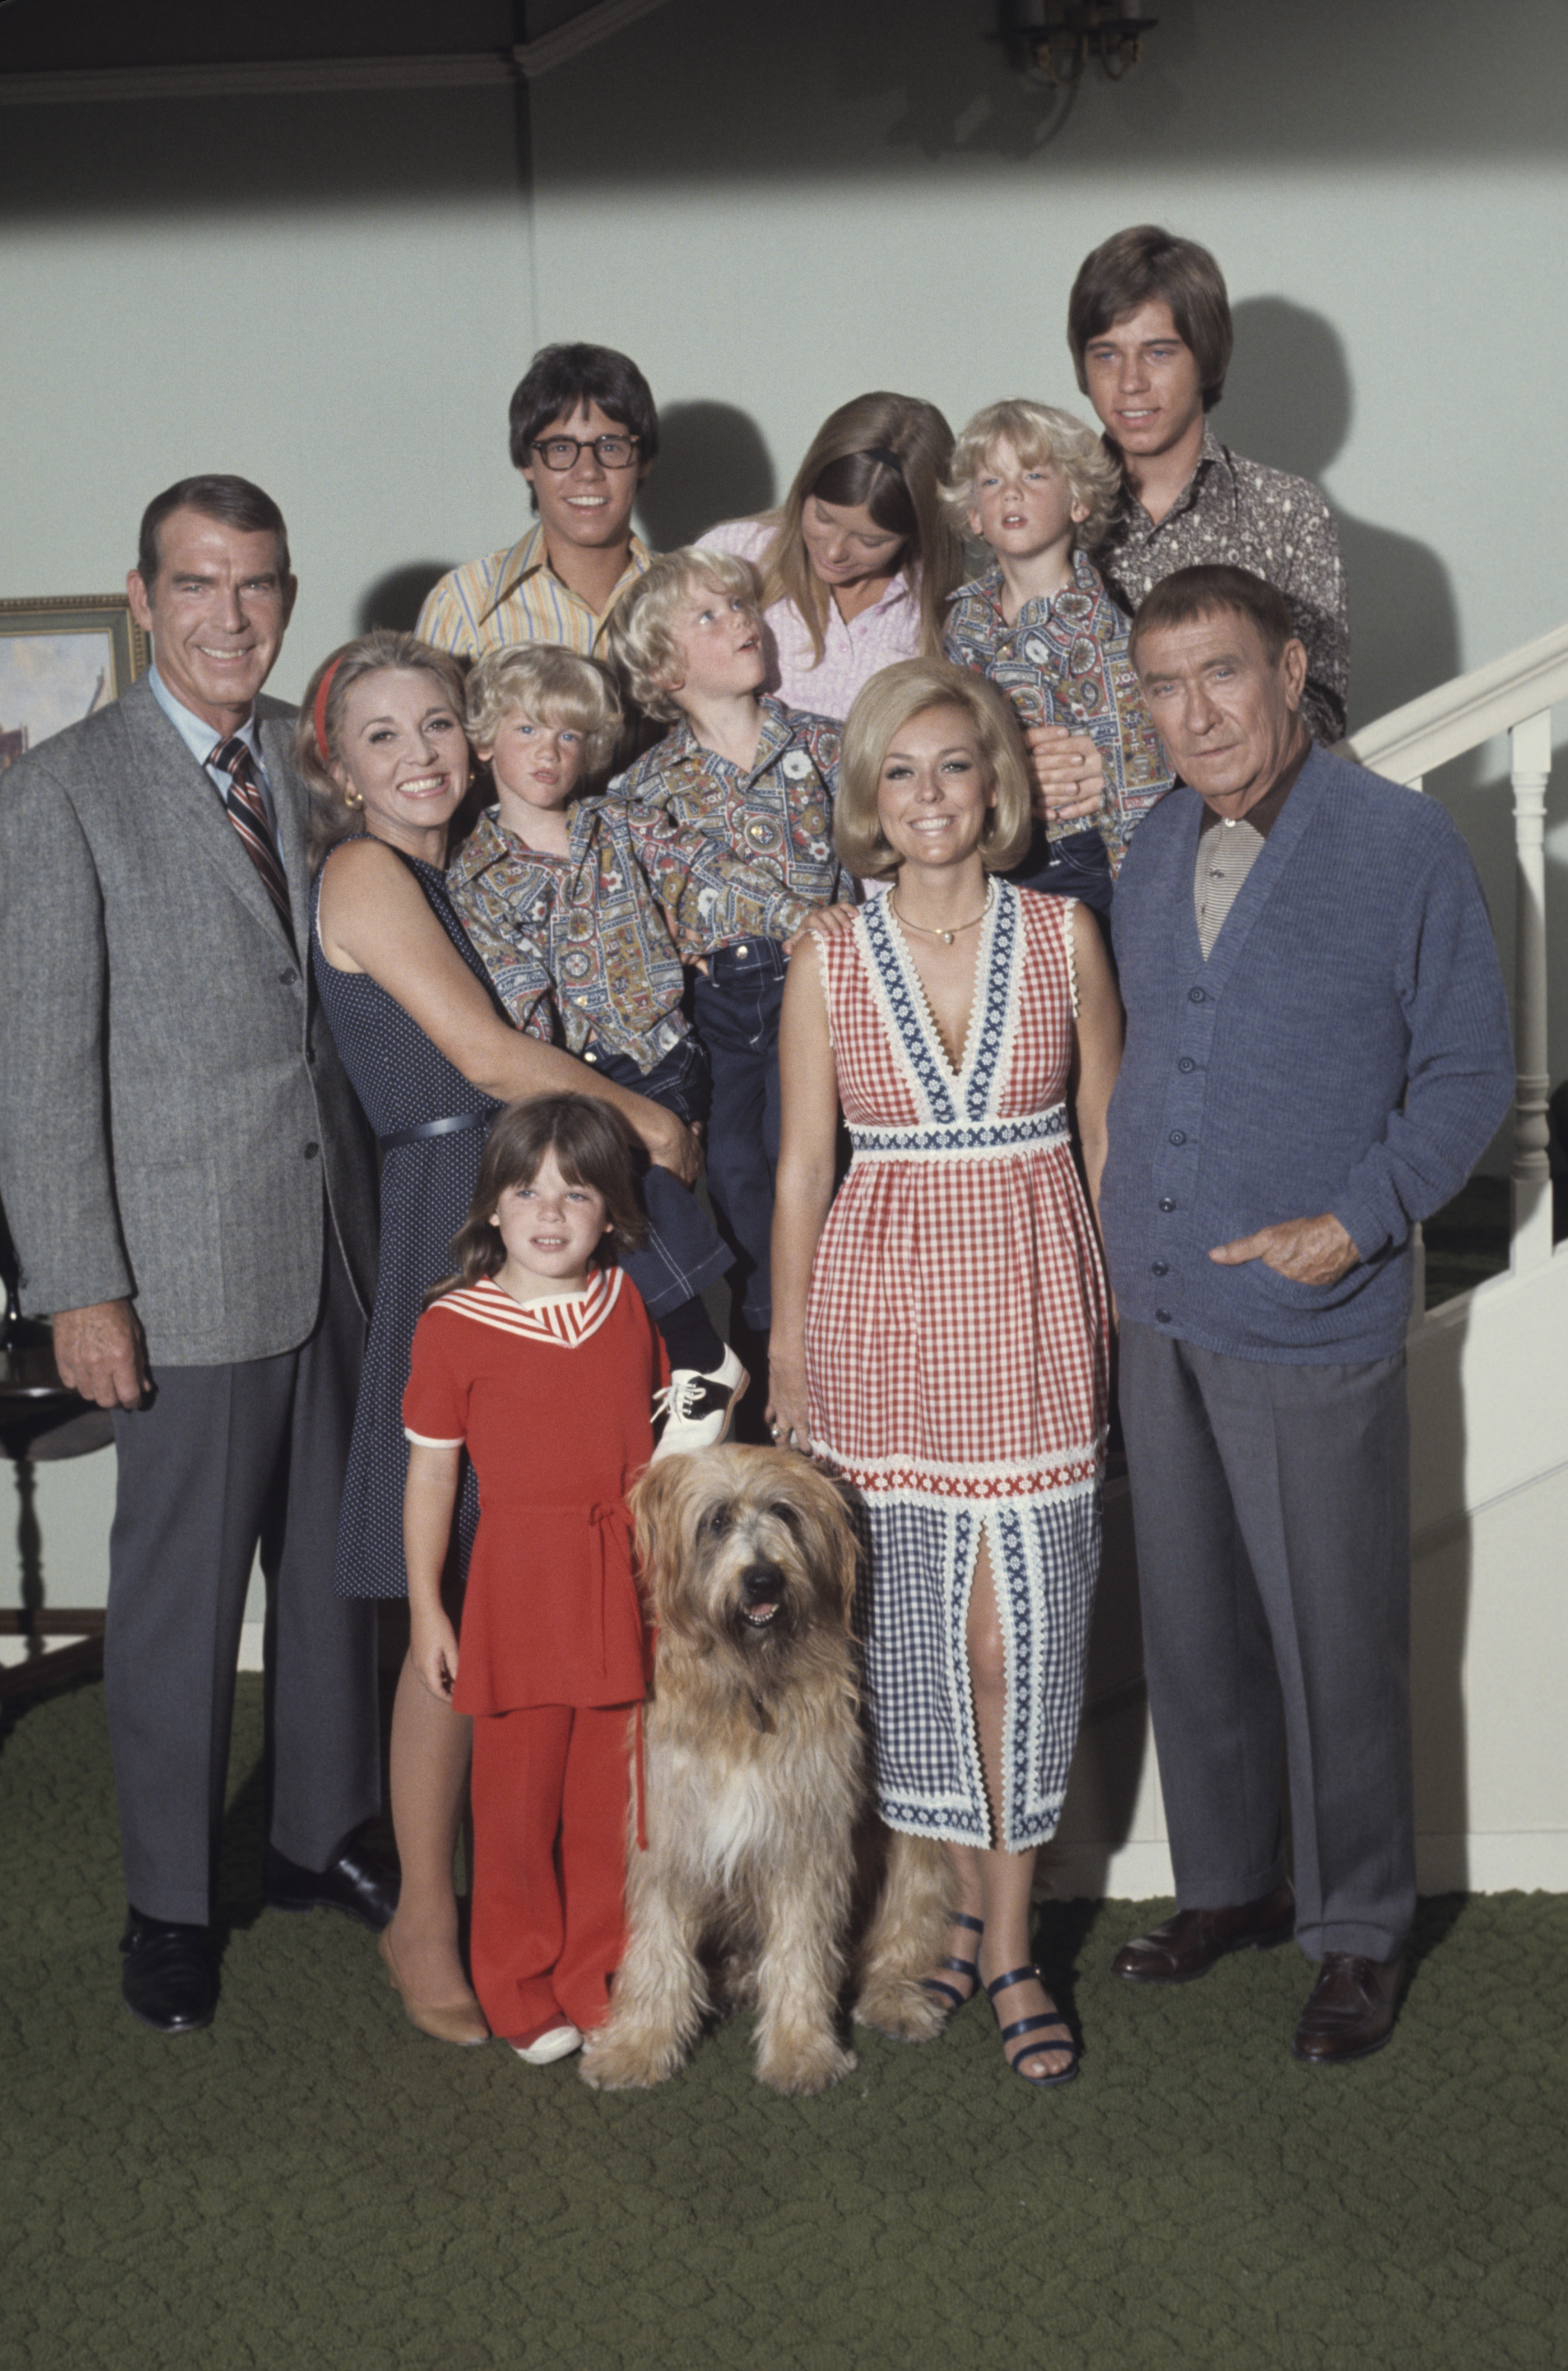 Fred MacMurray, Beverly Garland, Extras, Dawn Lyn, Barry Livingston, Ronnie Troup, Tina Cole, Stanley Livingston, William Demarest, and extras in "My Three Sons," circa 1970 | Source: Getty Images